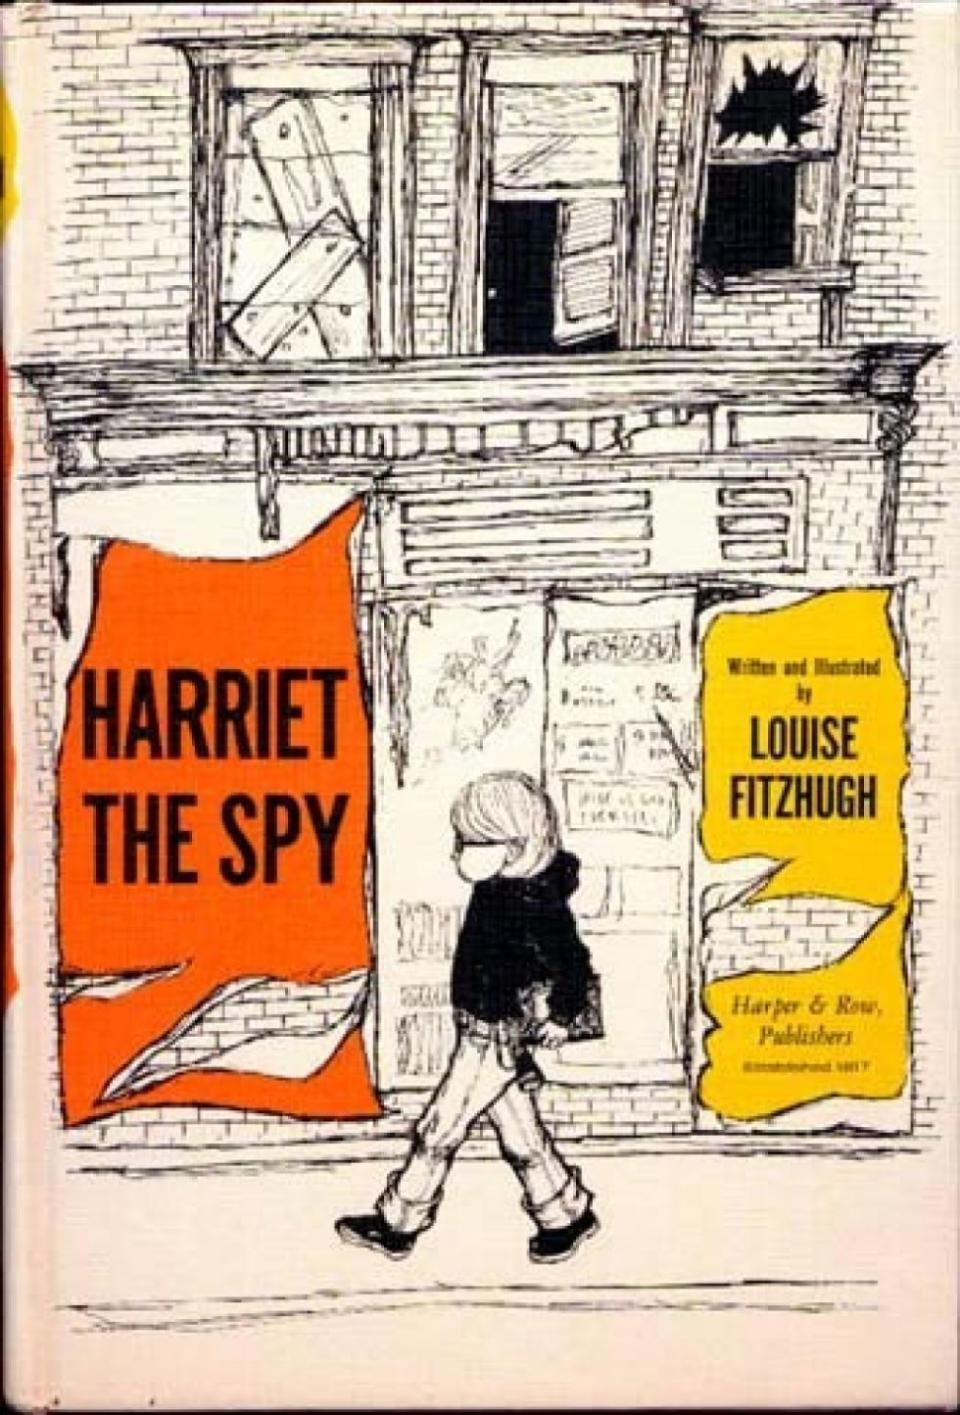 Harriet the Spy, by Louise Fitzhugh